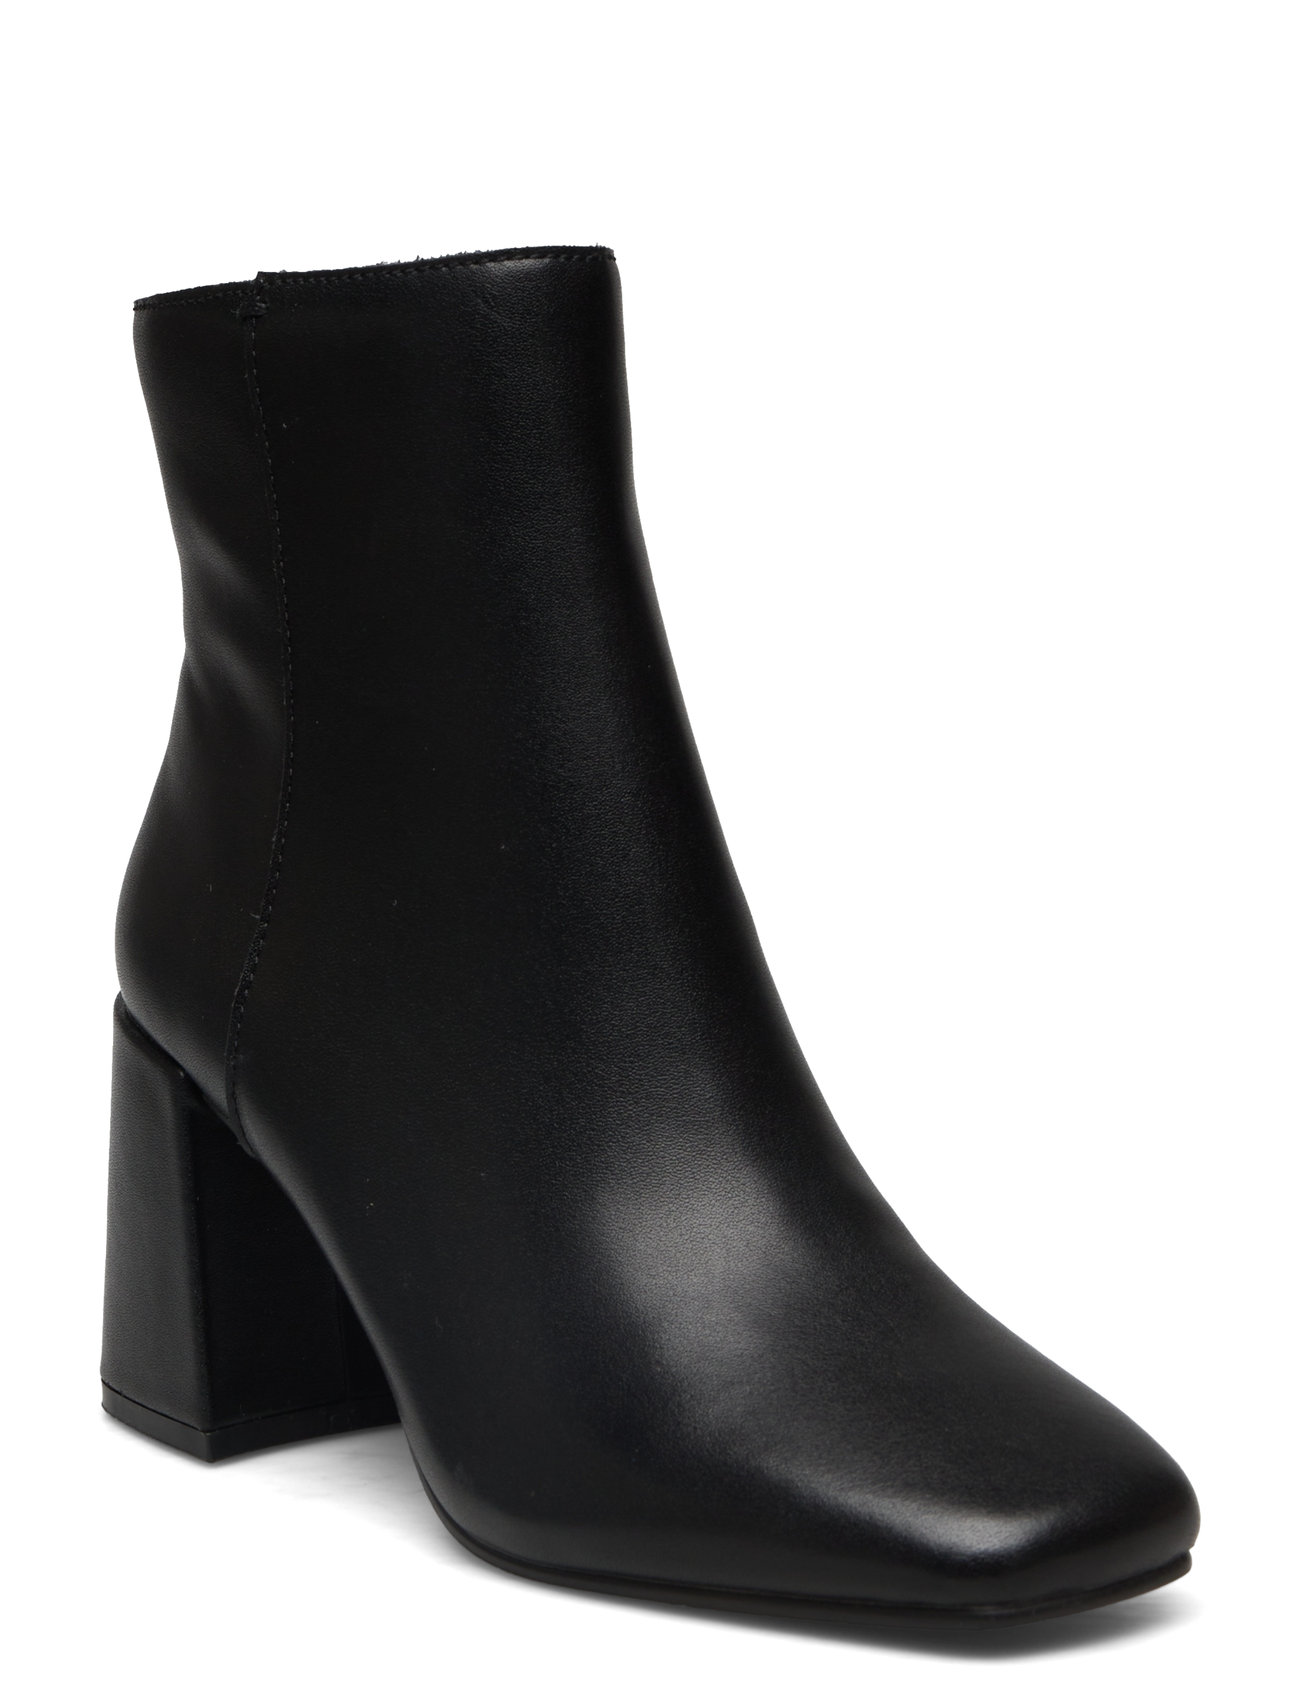 Restore Bootie Shoes Boots Ankle Boots Ankle Boots With Heel Black Steve Madden